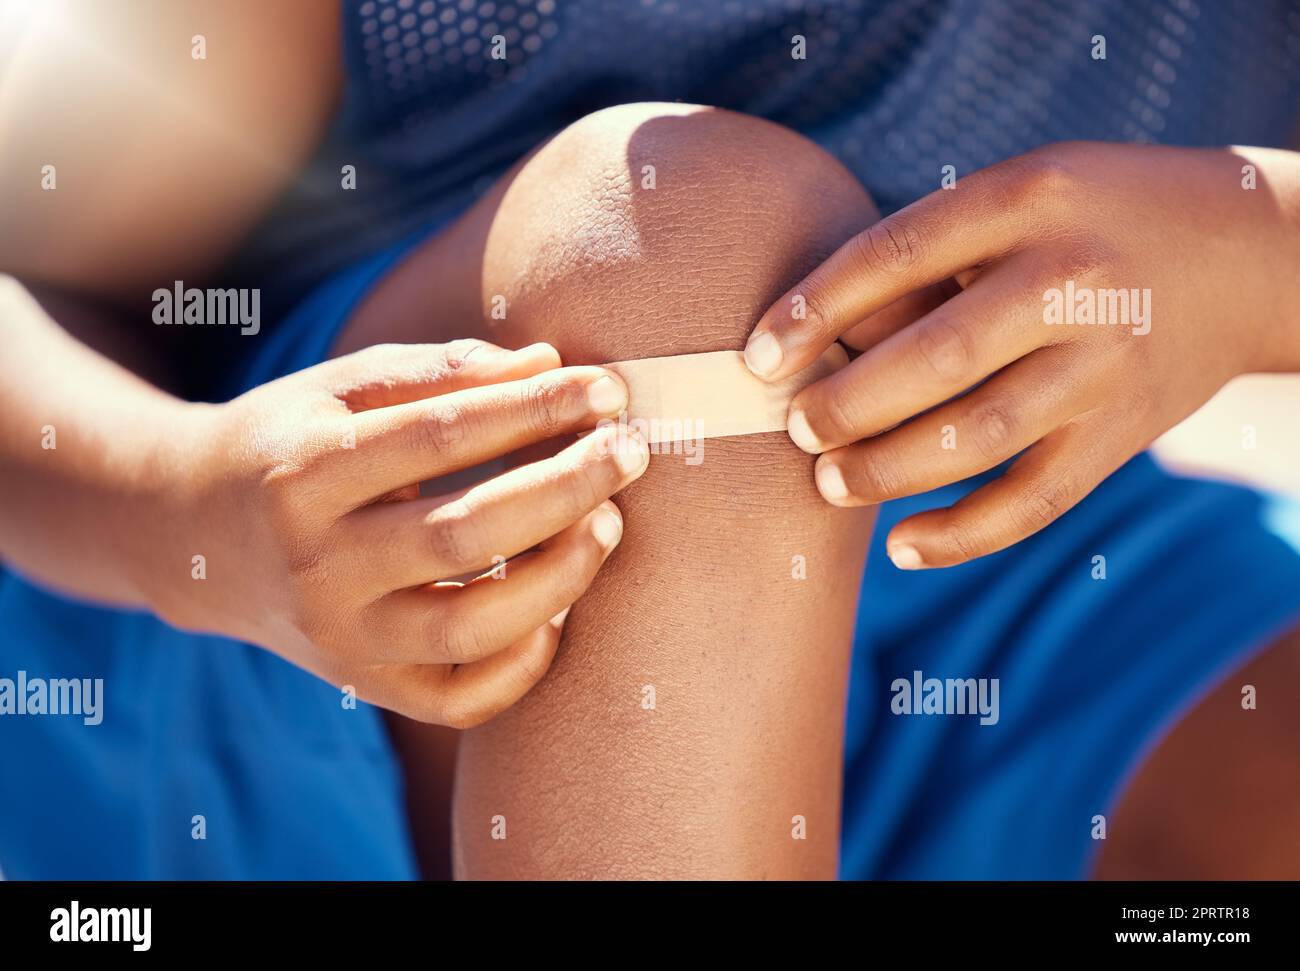 Children, accident and plaster with a band aid on the knee of boy with an injury, wound or pain. Kids, cut and heal with the hands of a male child outside with a scrape, bruise or injured anatomy Stock Photo